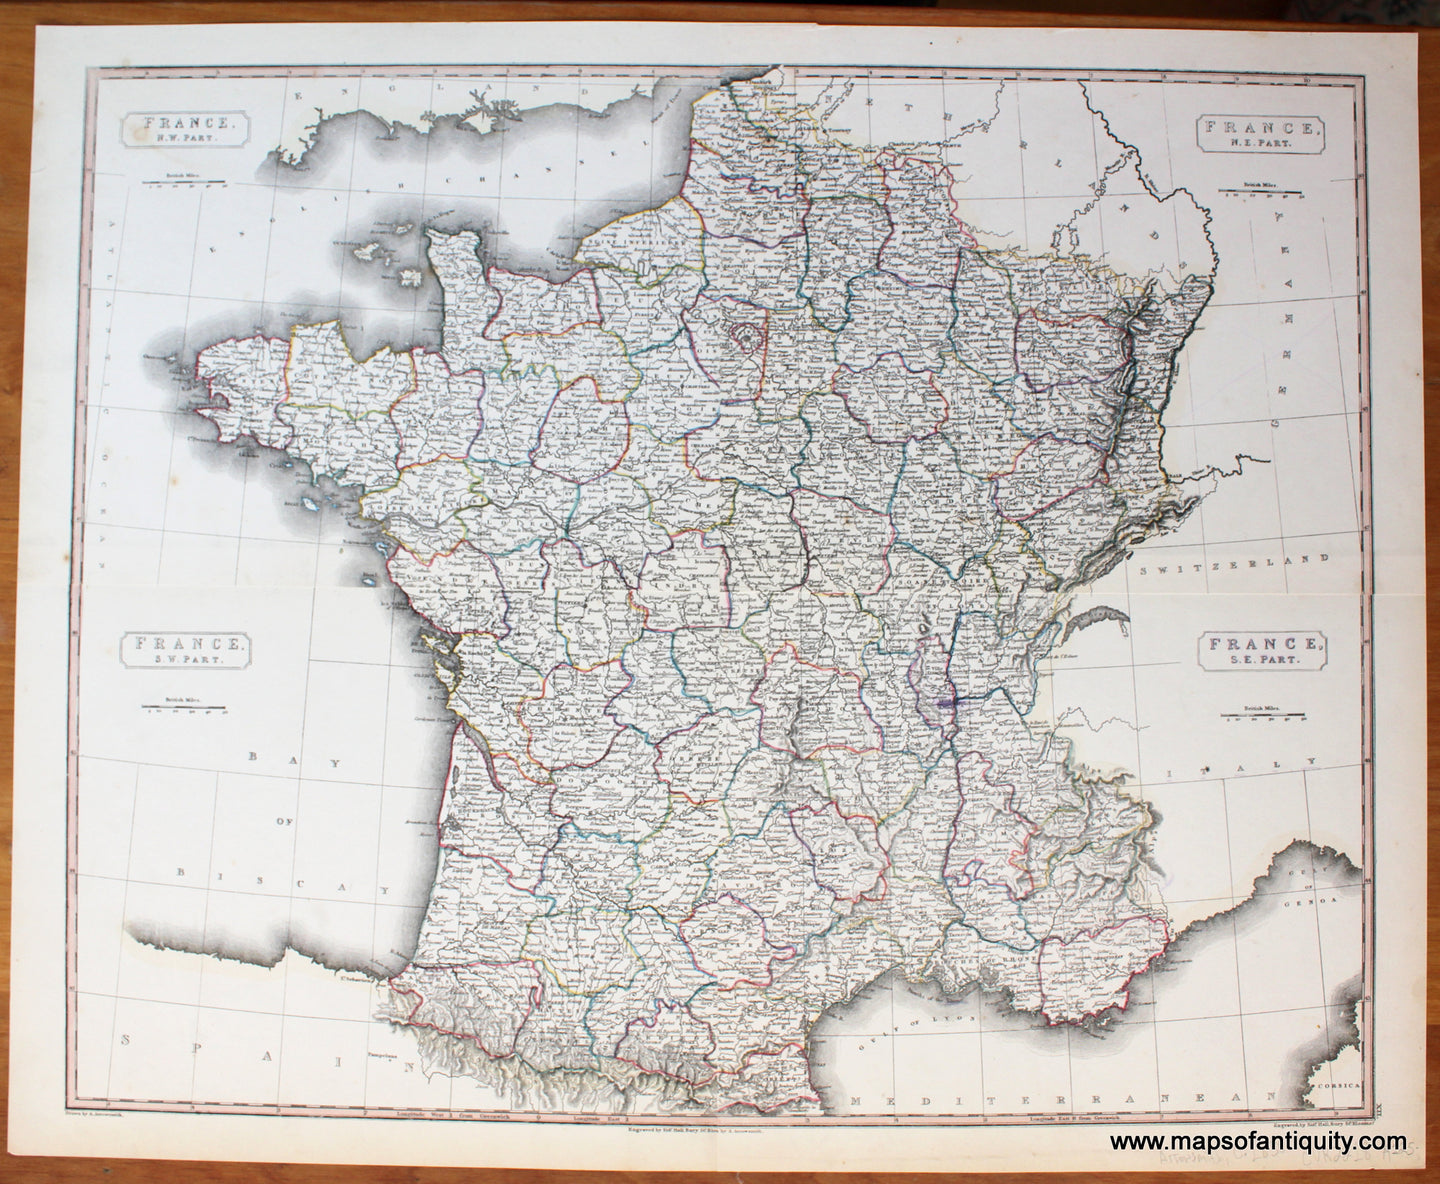 Antique-Map-France-Arrowsmith-1830-1830s-Early-Mid-19th-Century-Maps-of-Antiquity